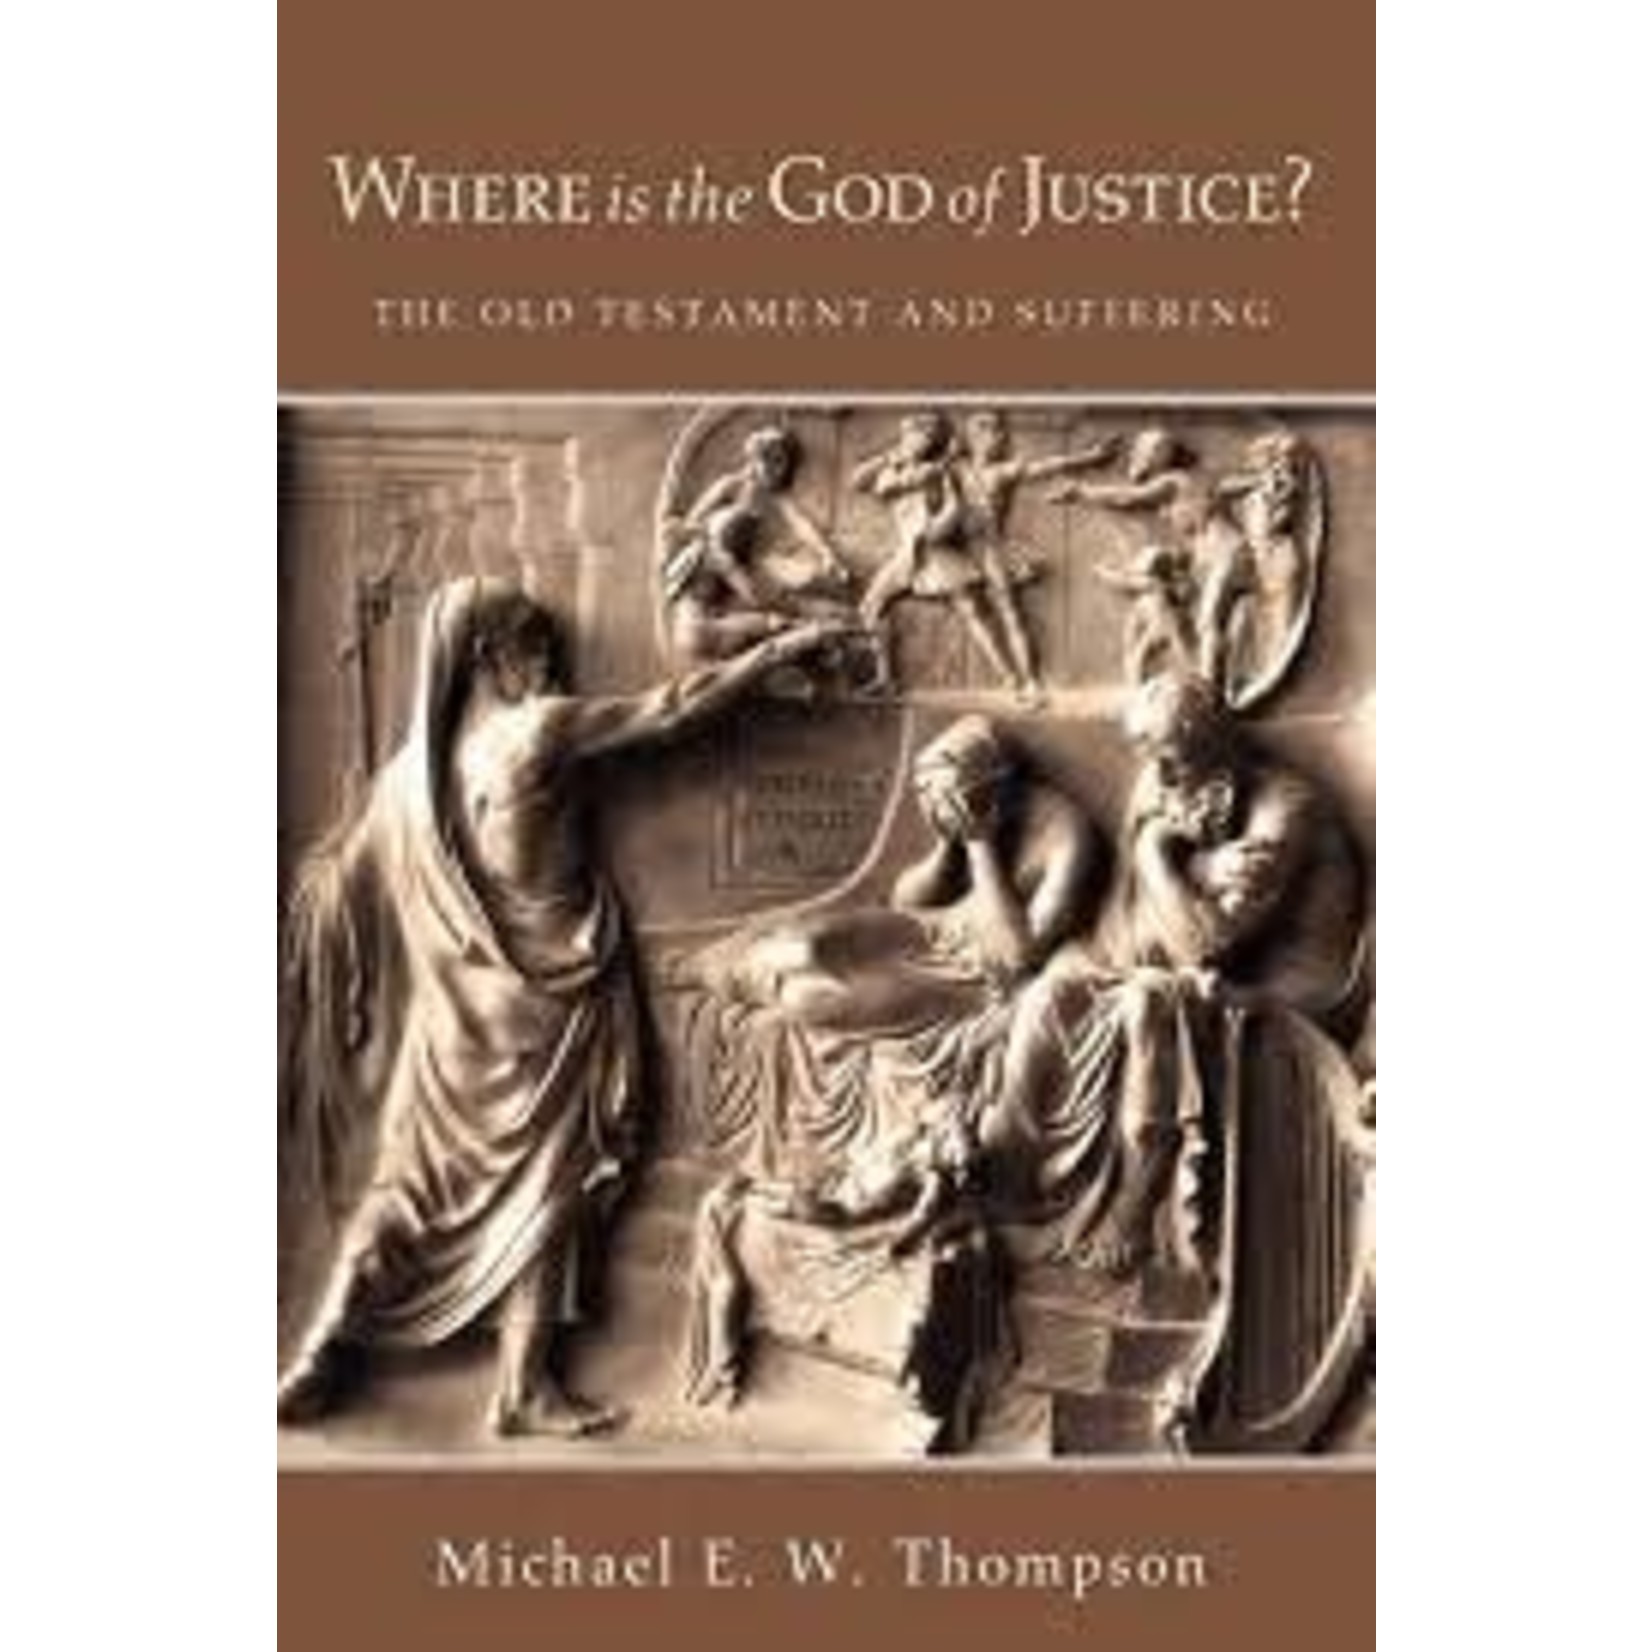 Where is the God of Justice?: The Old Testament and Suffering